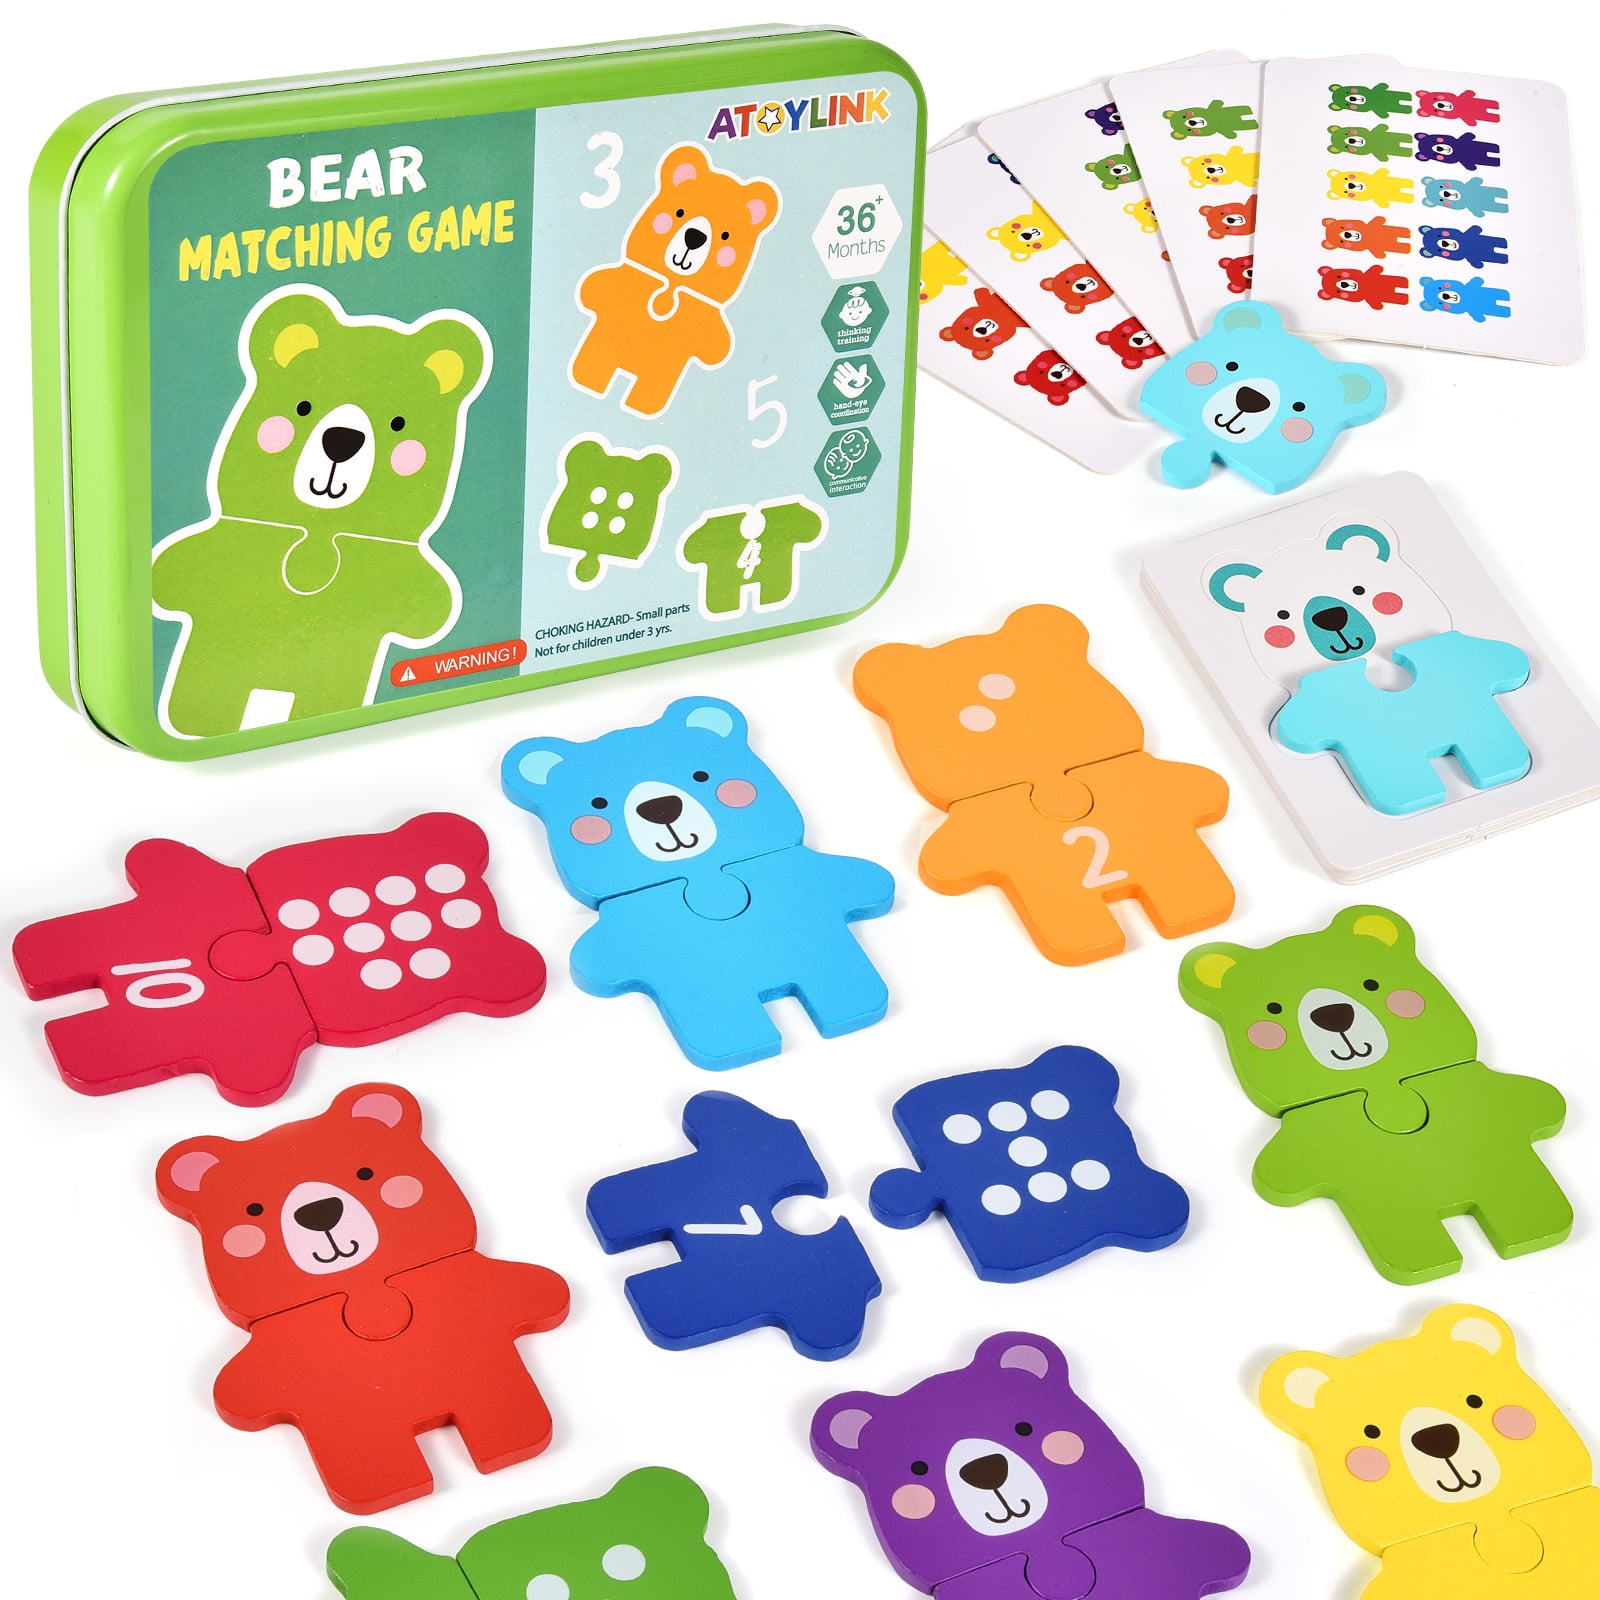 game number puzzles